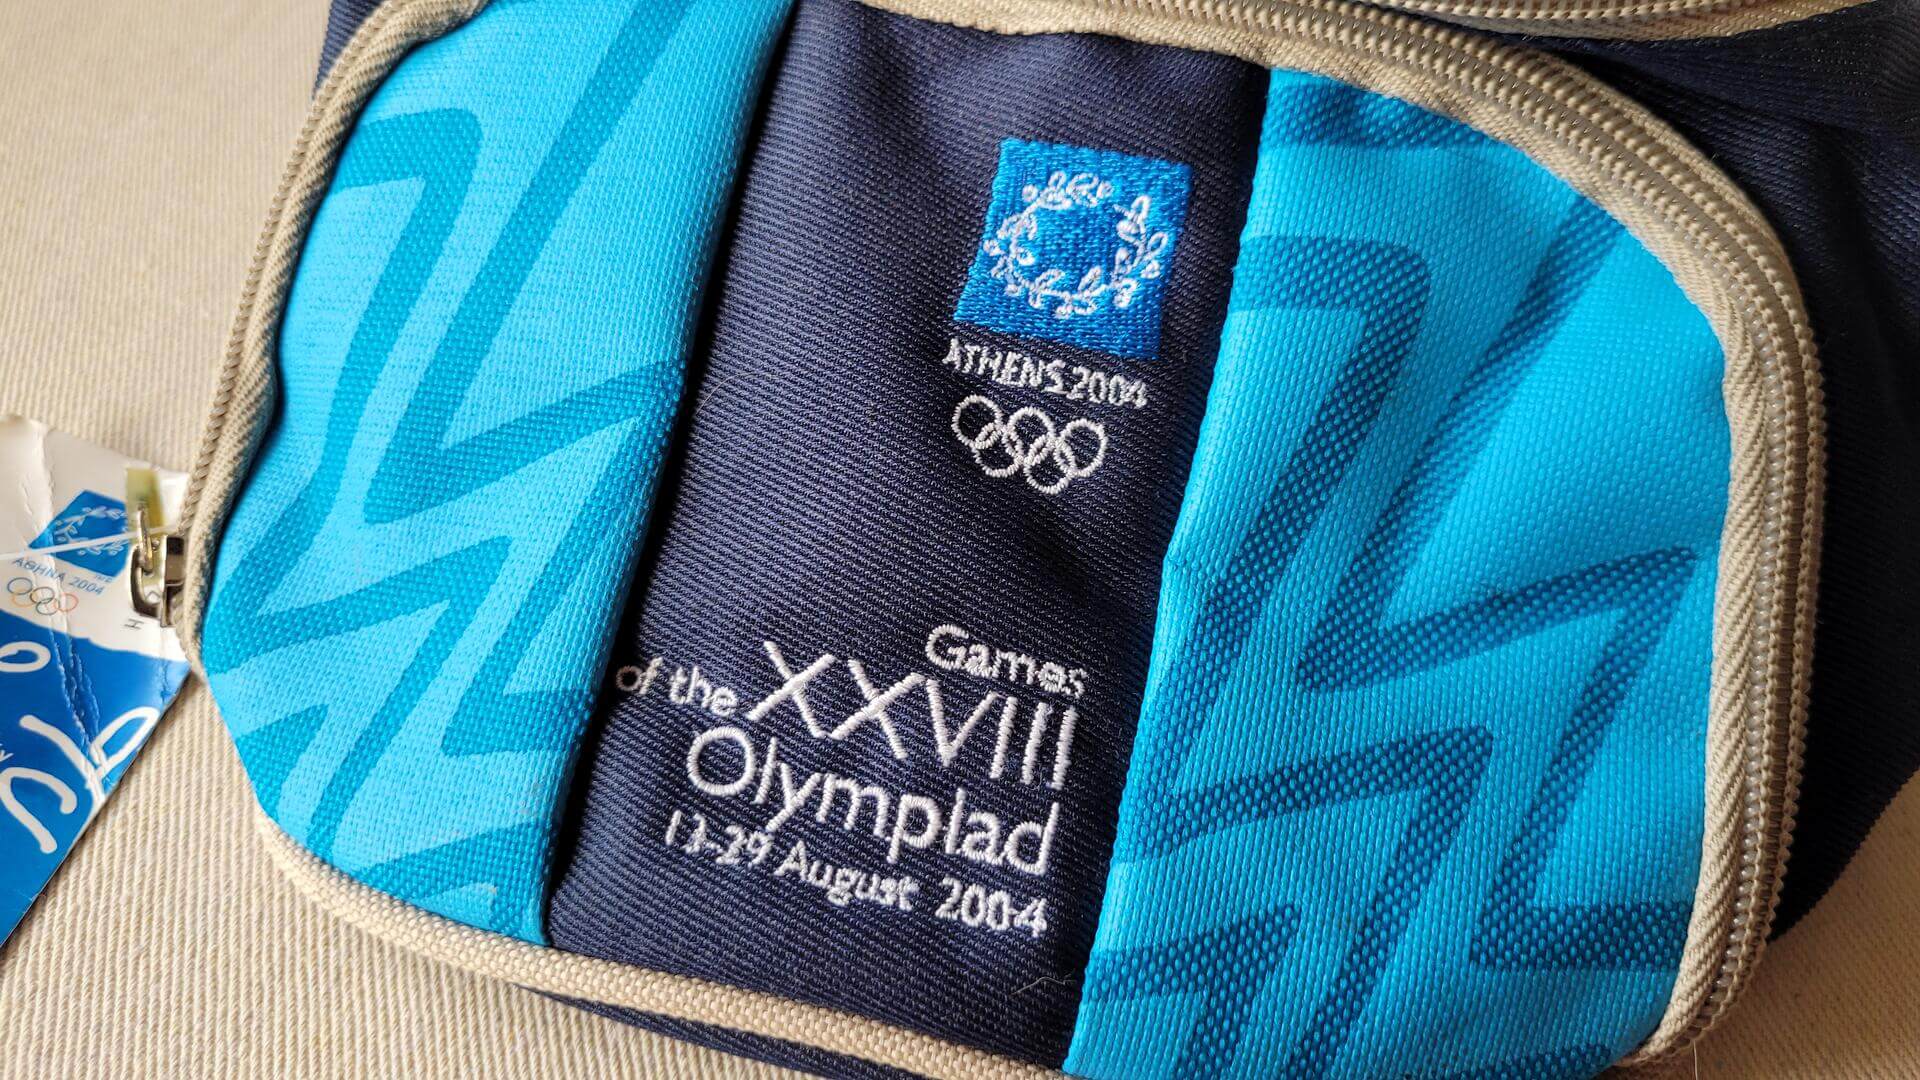 2004 Olympics official pouch bag or fanny waist pack. Rare vintage Athens Olympic Games official fan apparel and collectible Olympic memorabilia